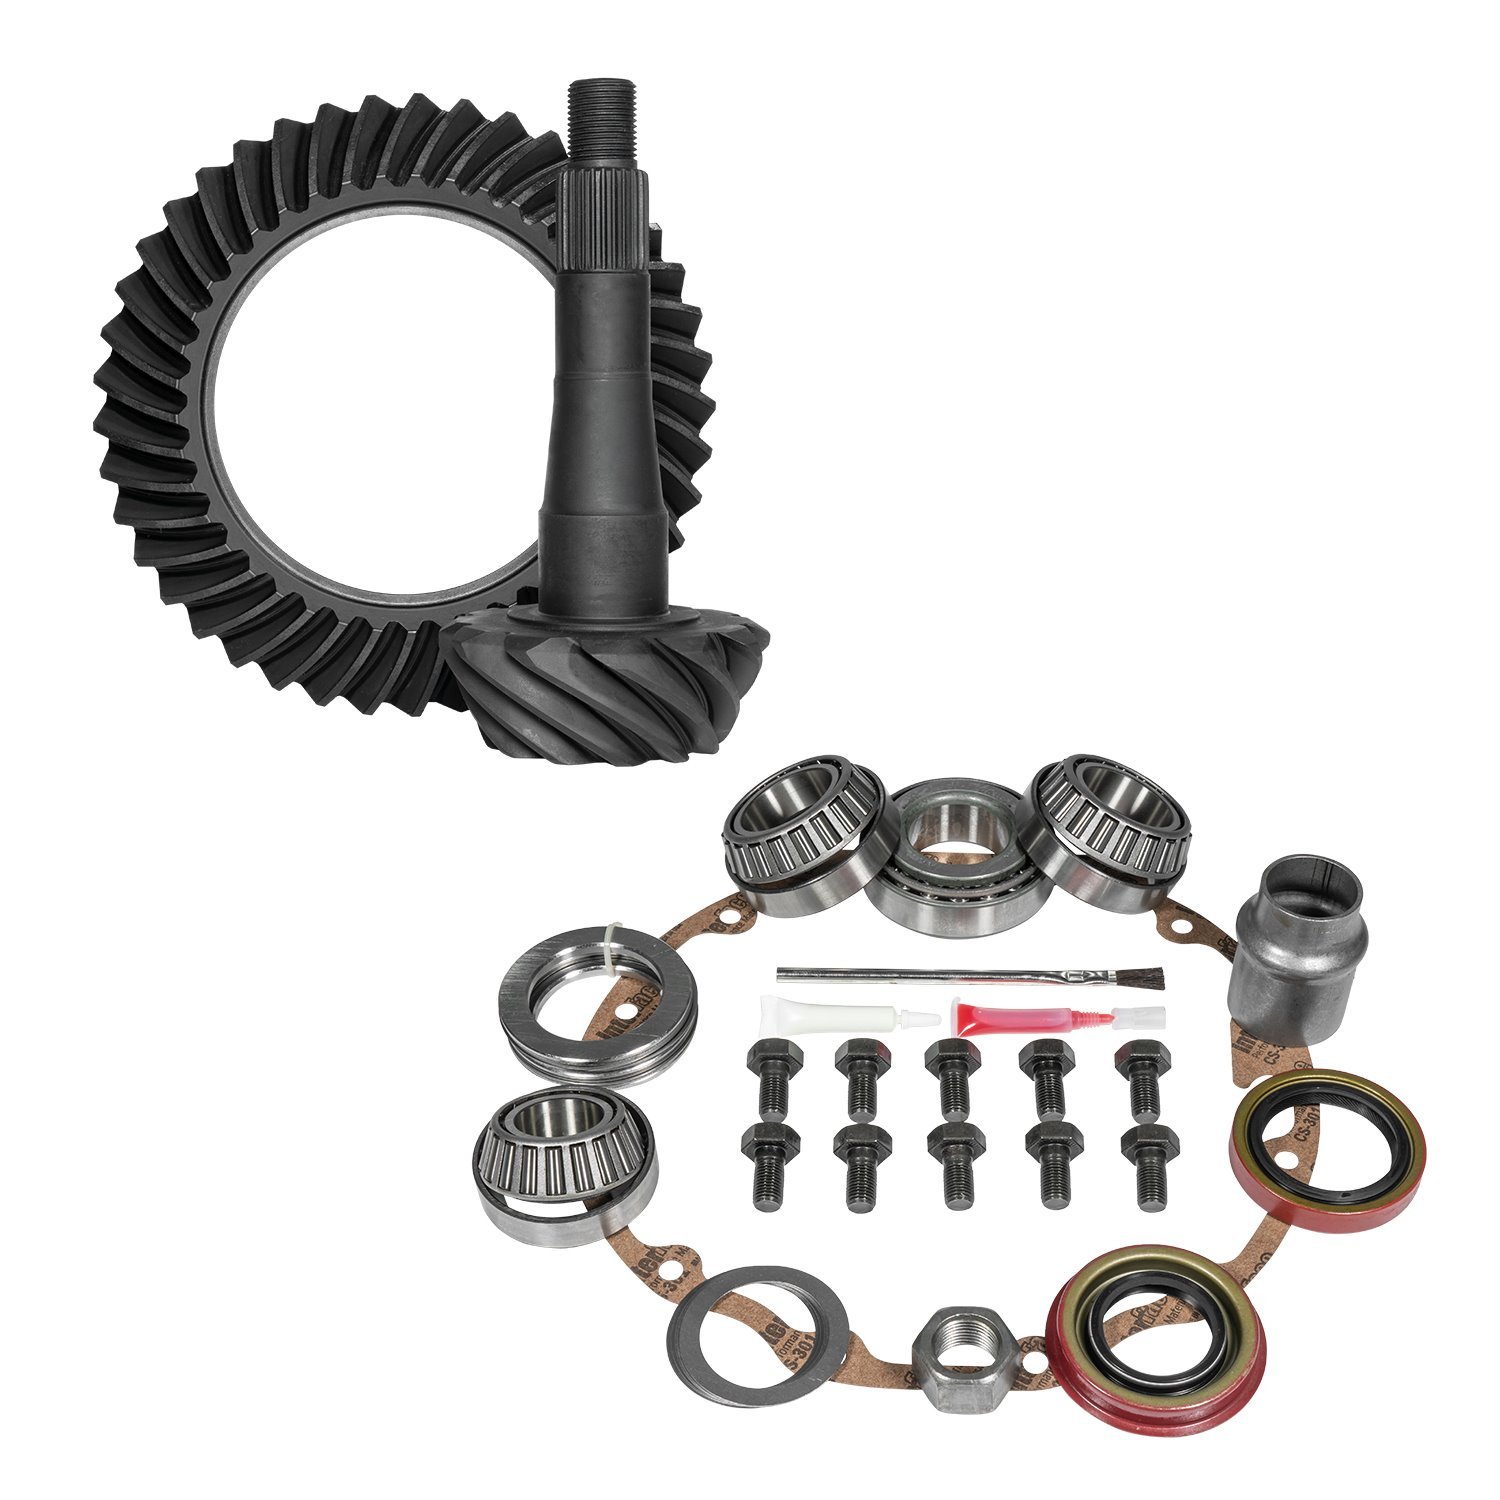 Muscle Car Re-Gear Kit For GM 8.5 in. Olds Diff, 27 Spline, 3.73 Ratio